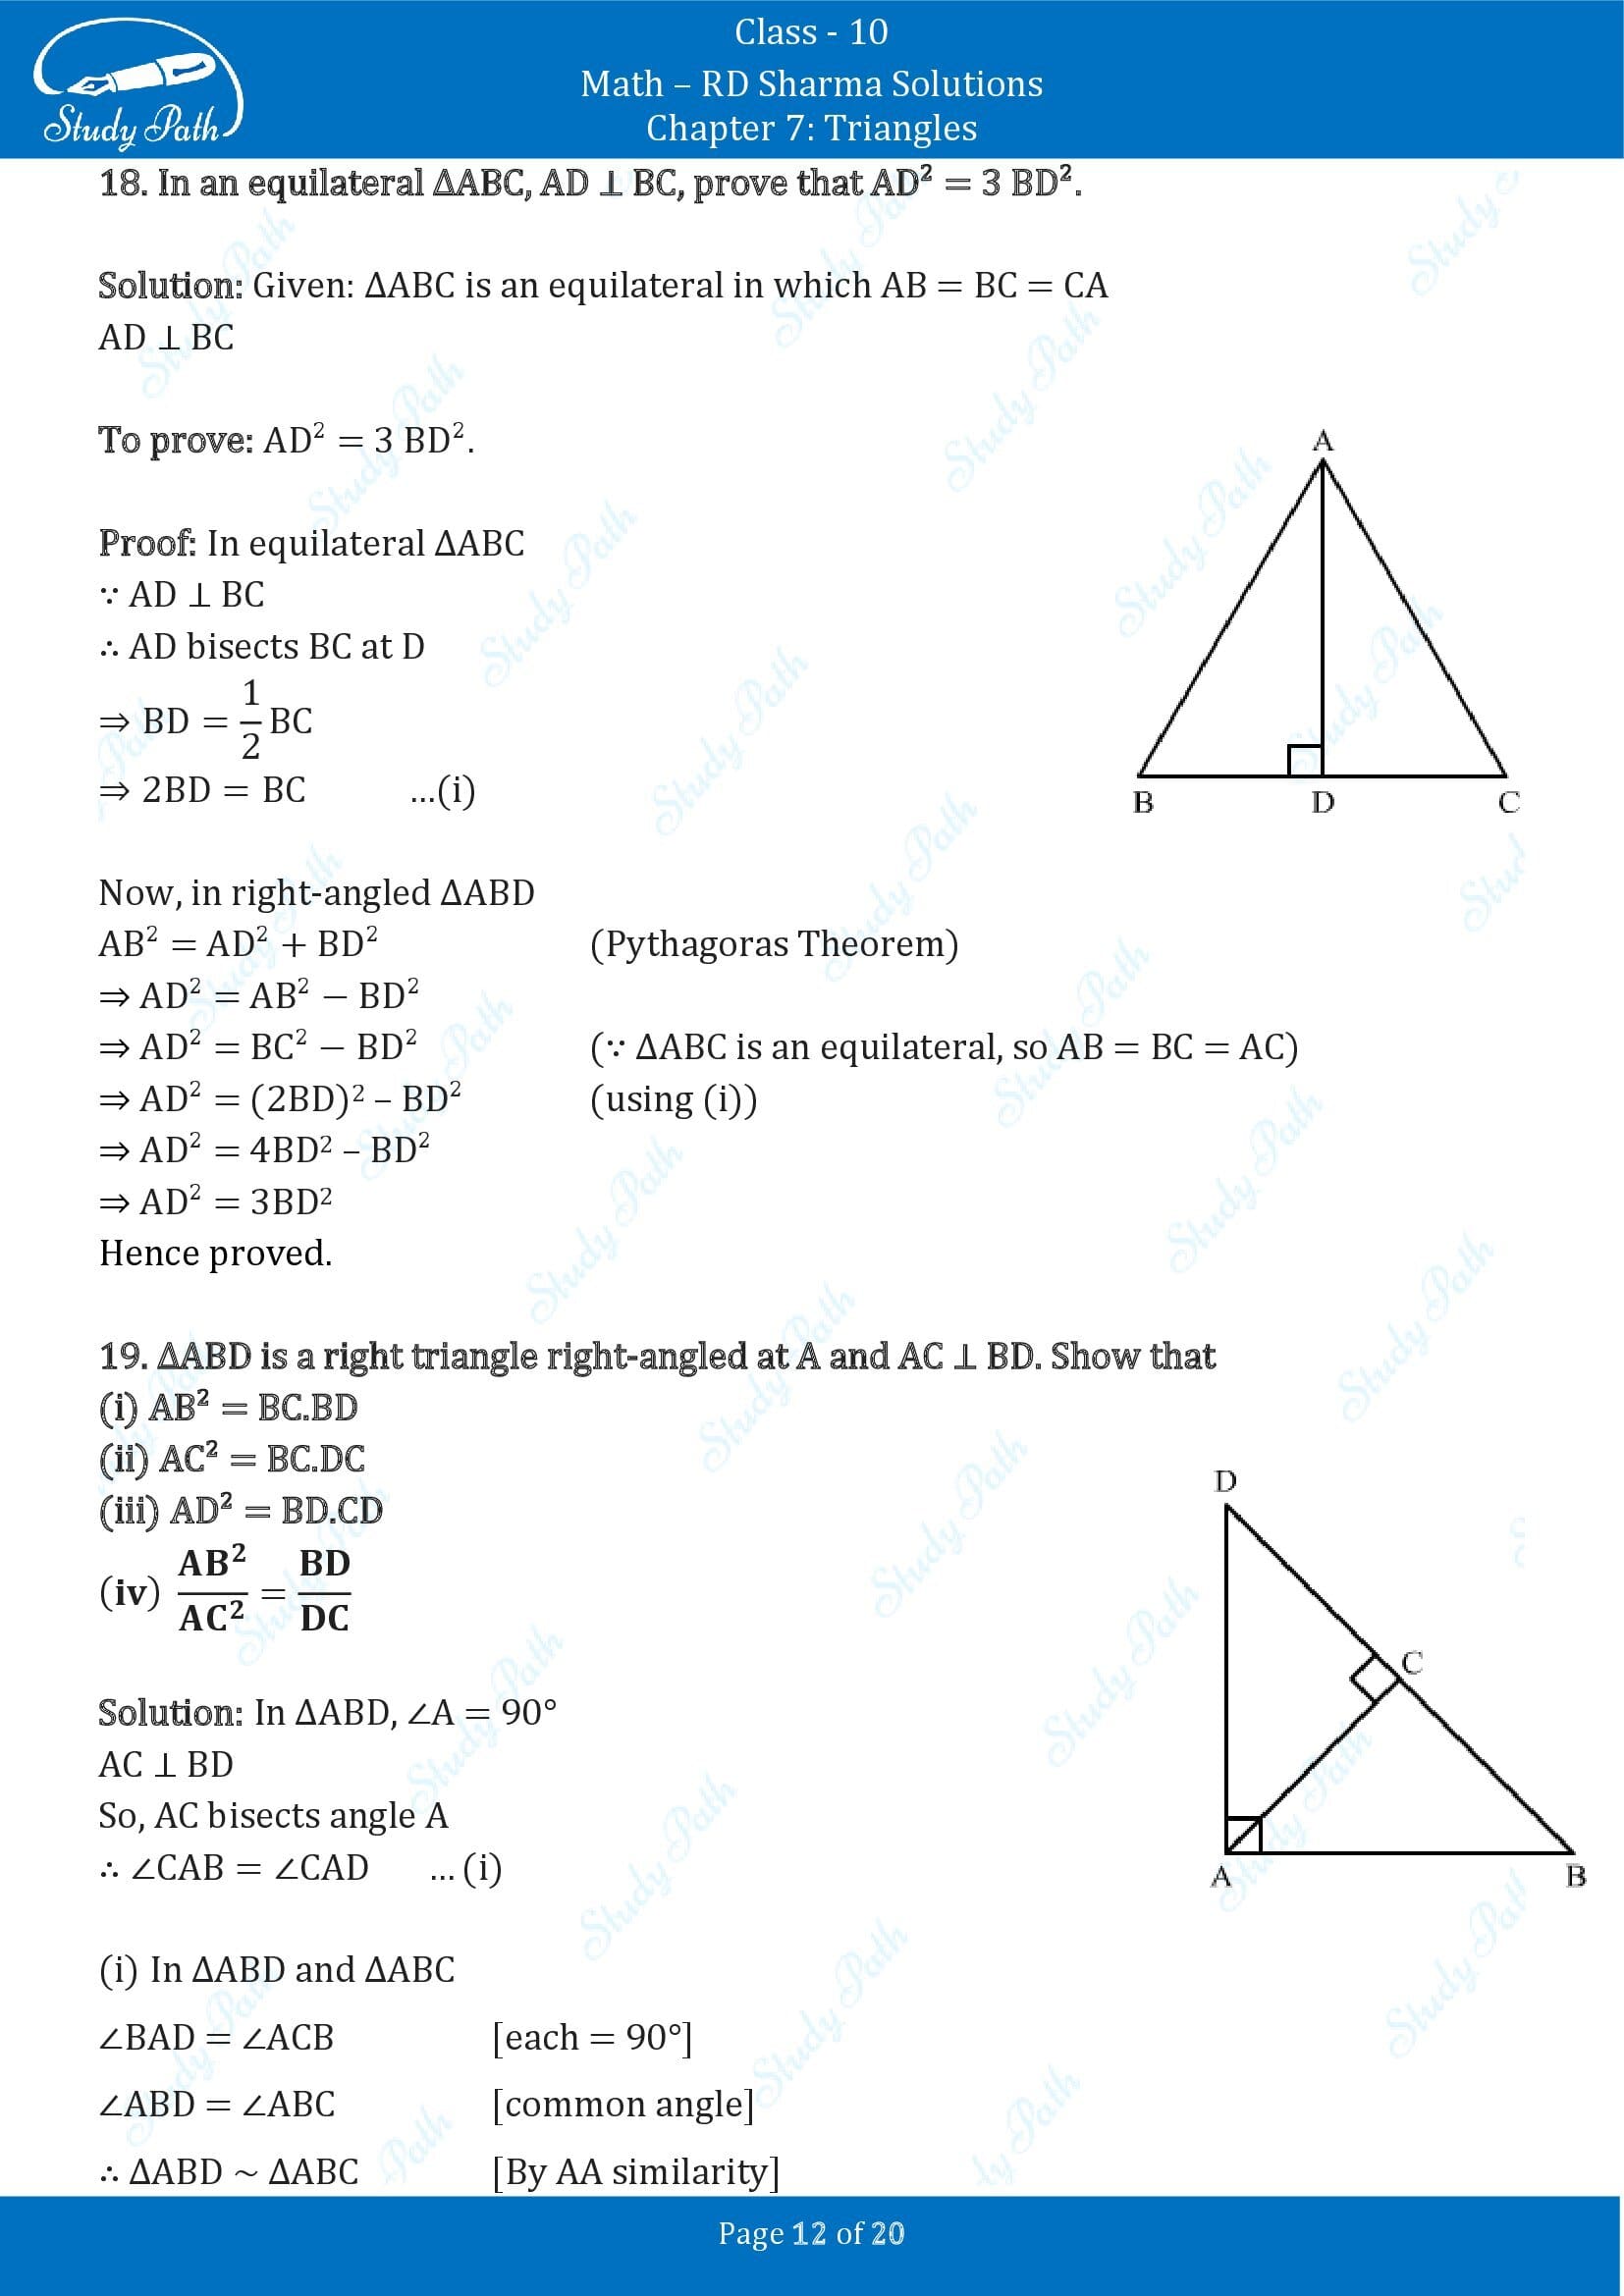 RD Sharma Solutions Class 10 Chapter 7 Triangles Exercise 7.7 00012